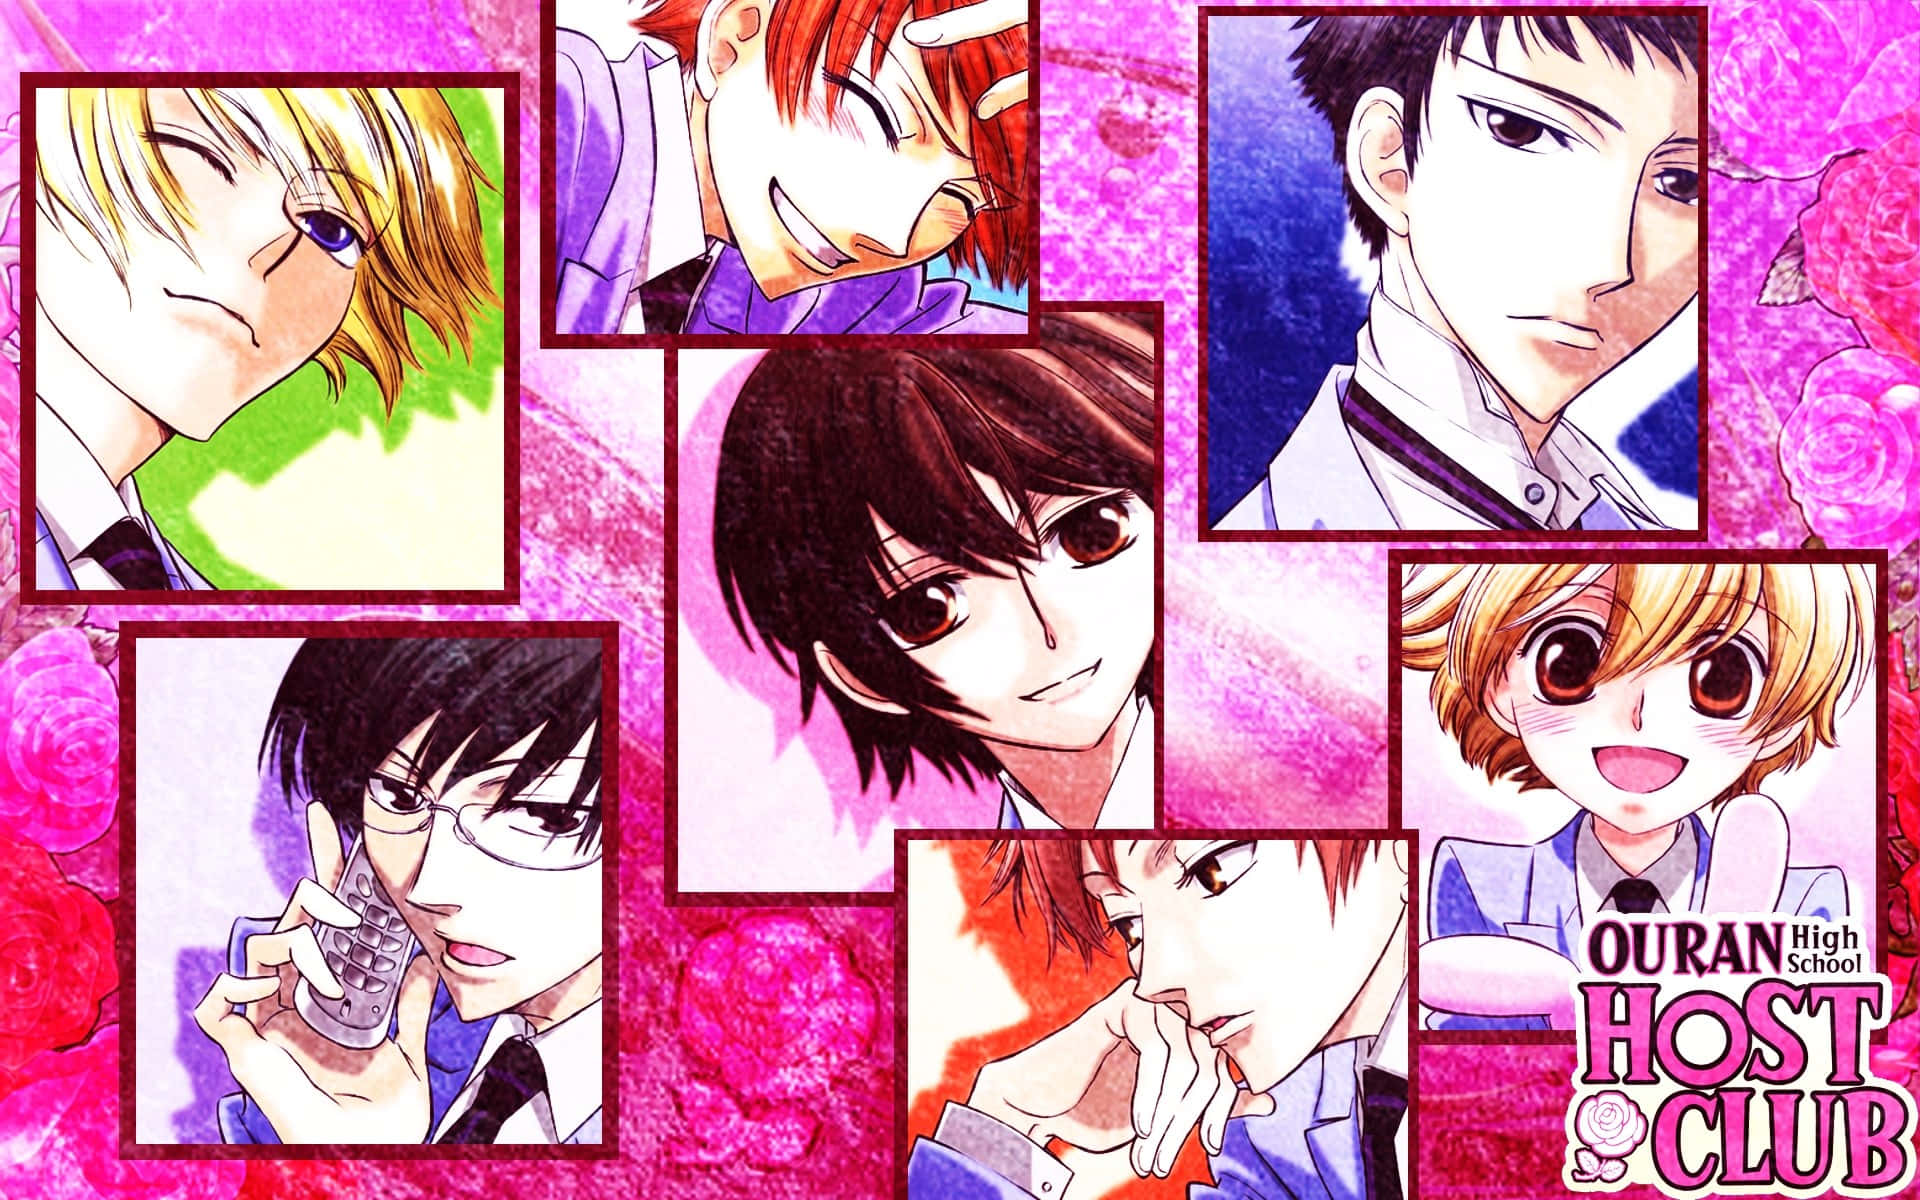 Caption: Members of the Ouran High School Host Club grouped together in brotherly camaraderie. Wallpaper